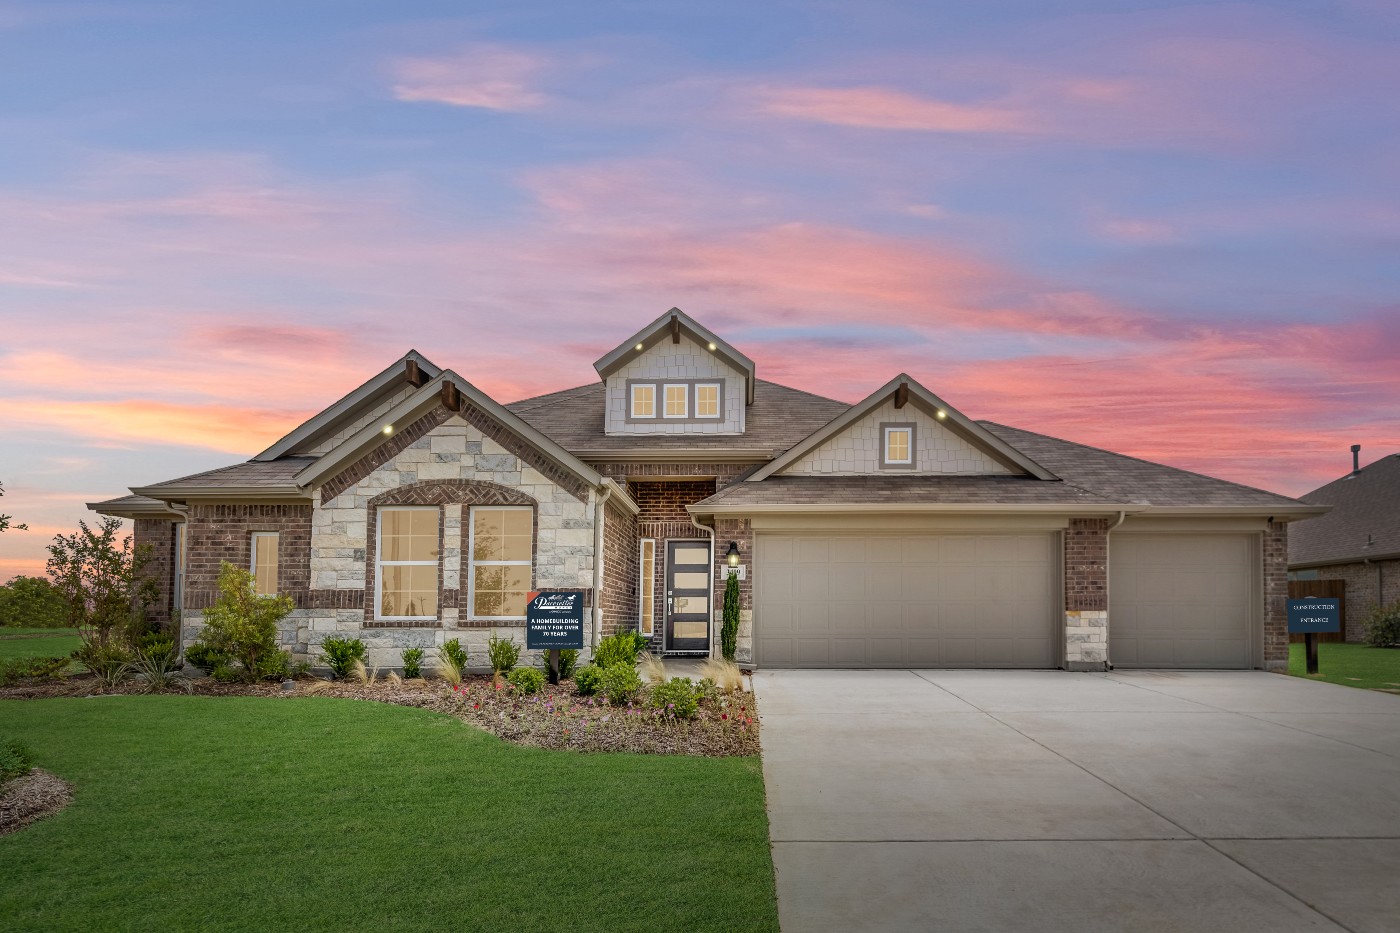  Woodland Creek - 2 Homes Remaining! New Homes in Lavon